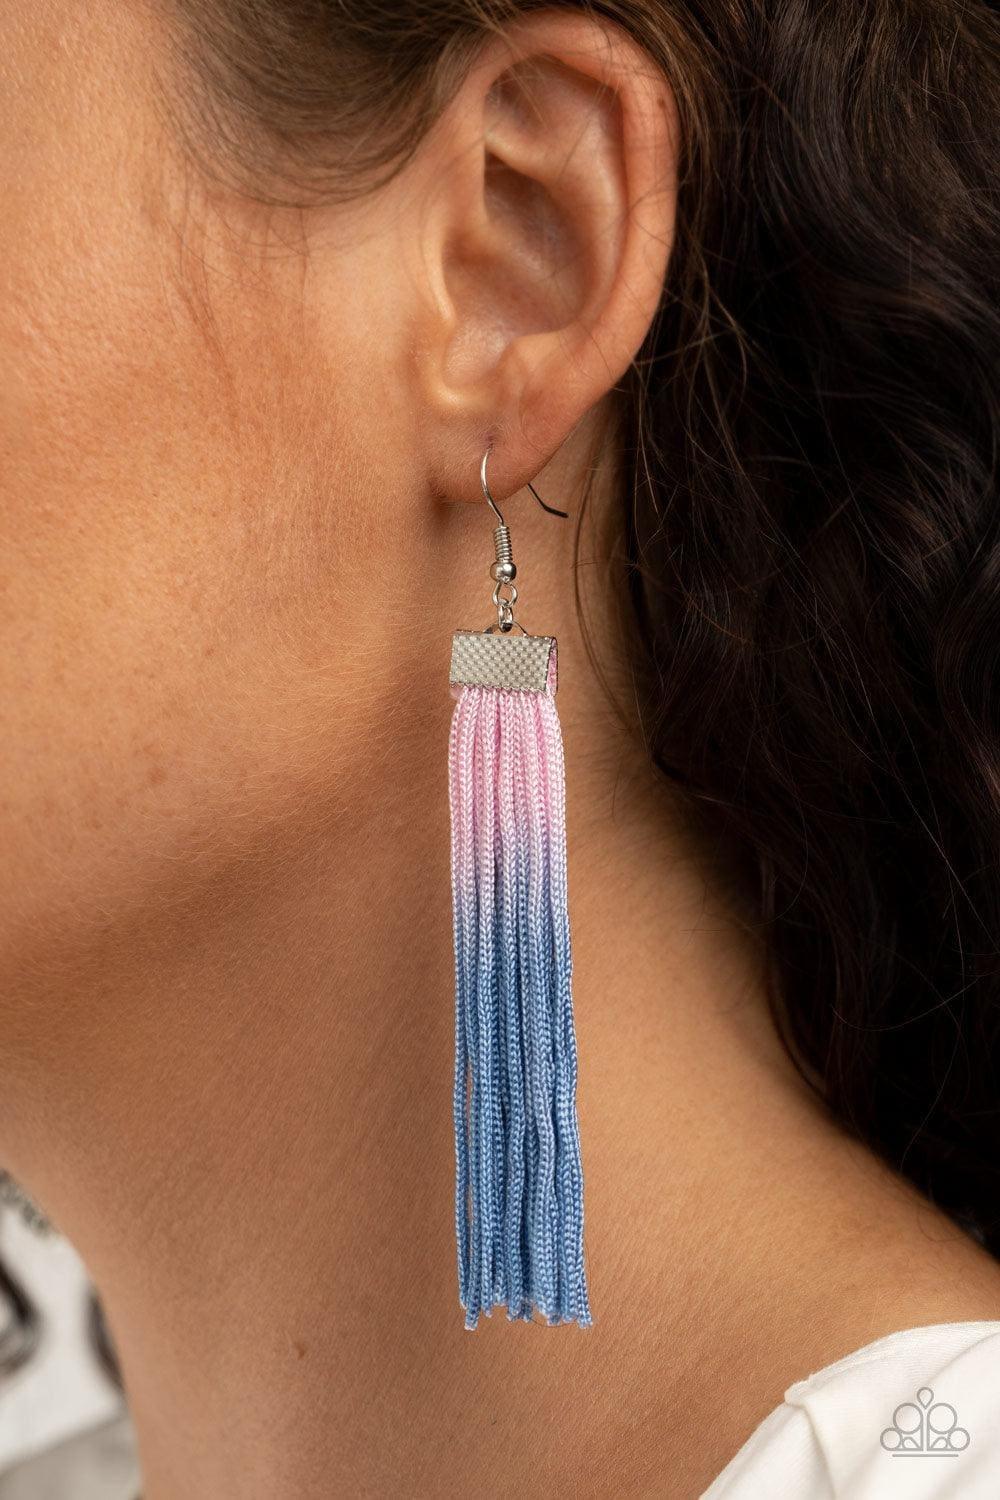 Paparazzi Accessories - Dual Immersion - Pink Earrings - Bling by JessieK